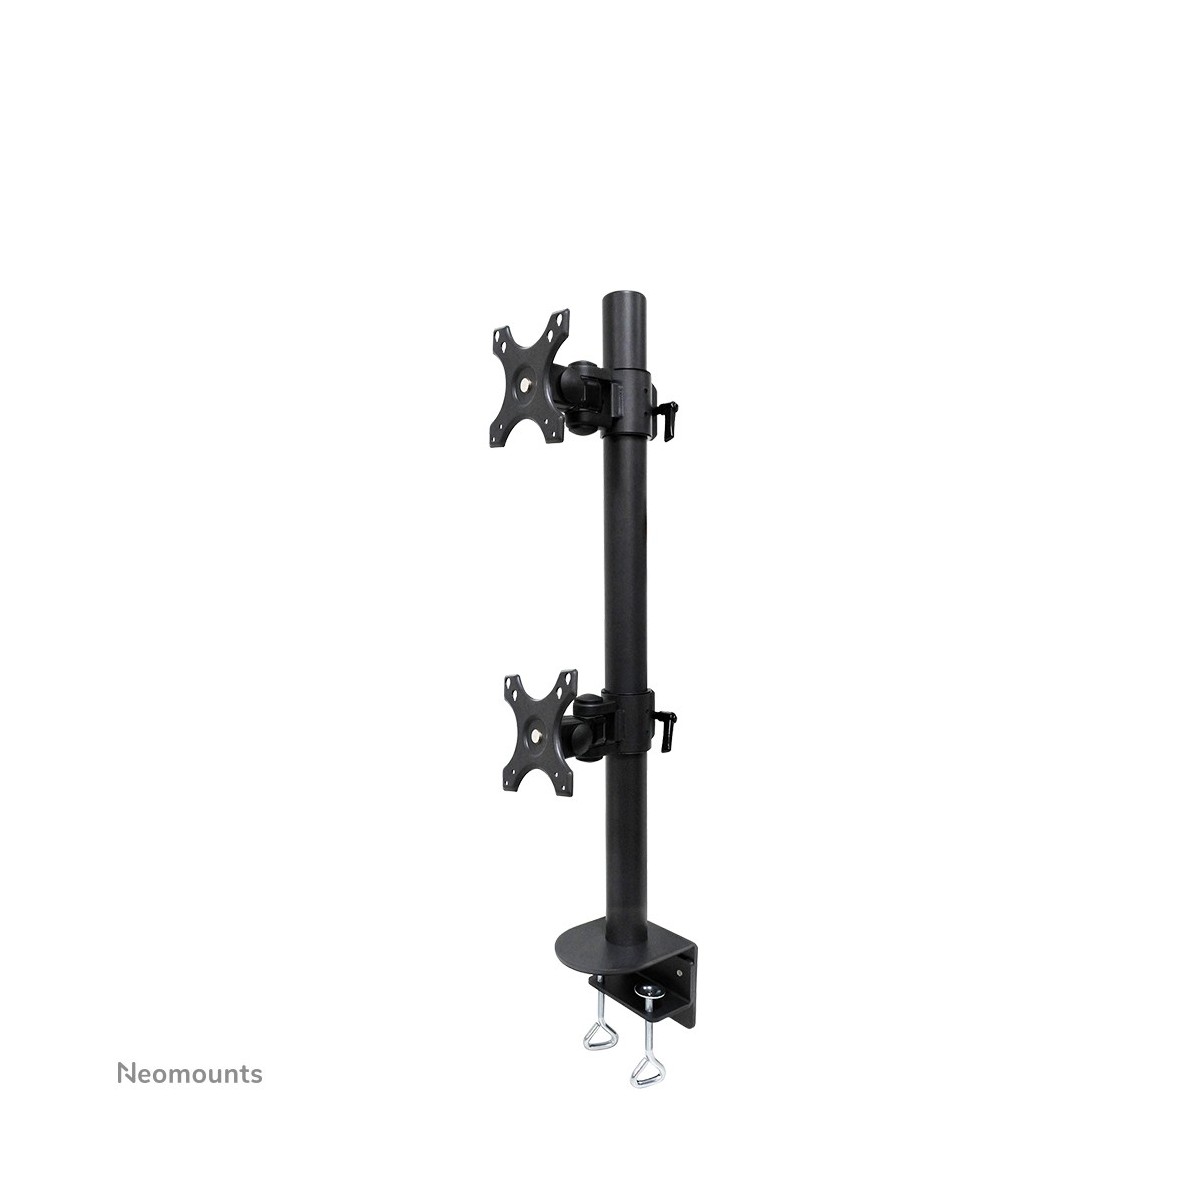 Neomounts by Newstar monitor desk mount for curved screens - Clamp - 15 kg - 43.2 cm (17) - 124.5 cm (49) - 100 x 100 mm - Black